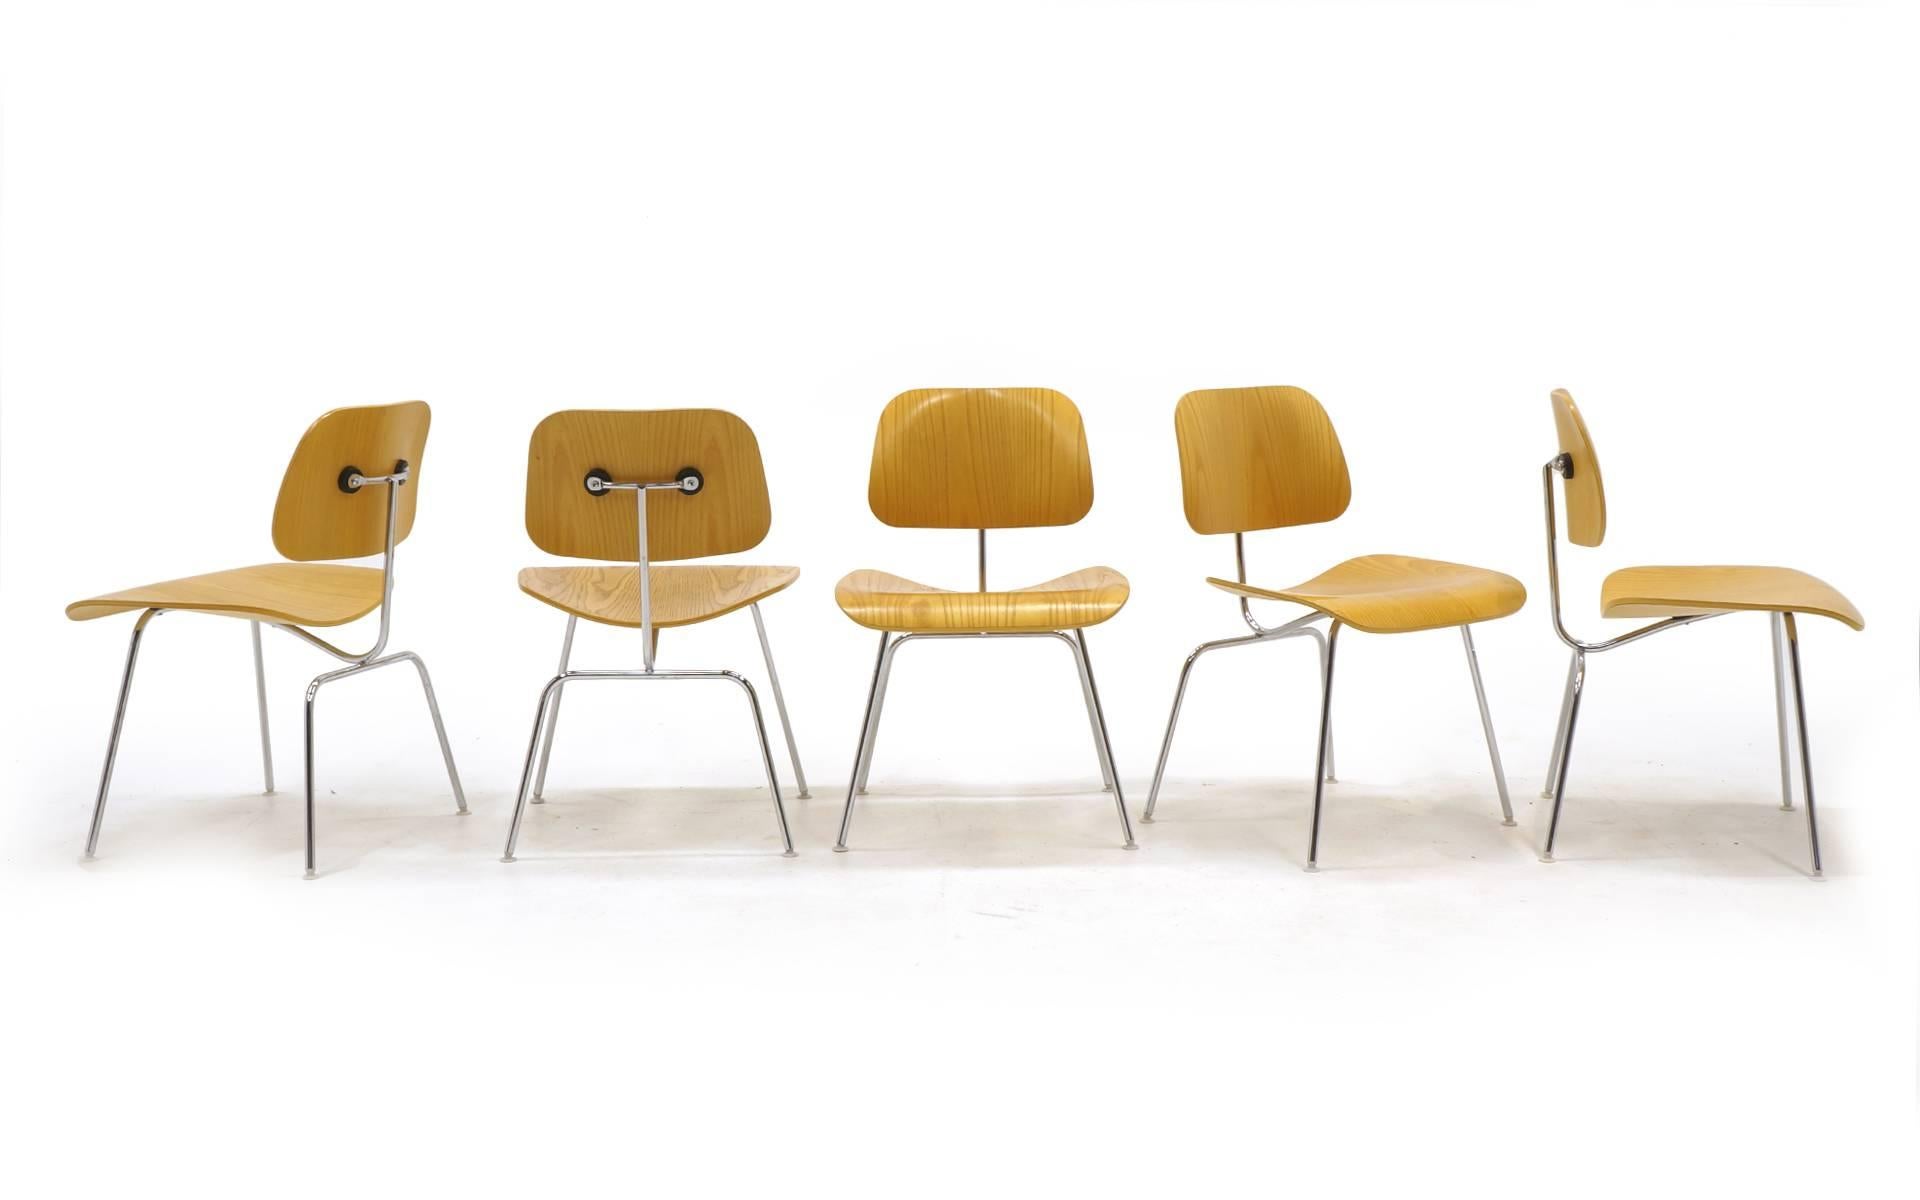 Set of ten Charles and Ray Eames designed DCMs (Dining Chair Metal) for Herman Miller. Classic, timeless design.